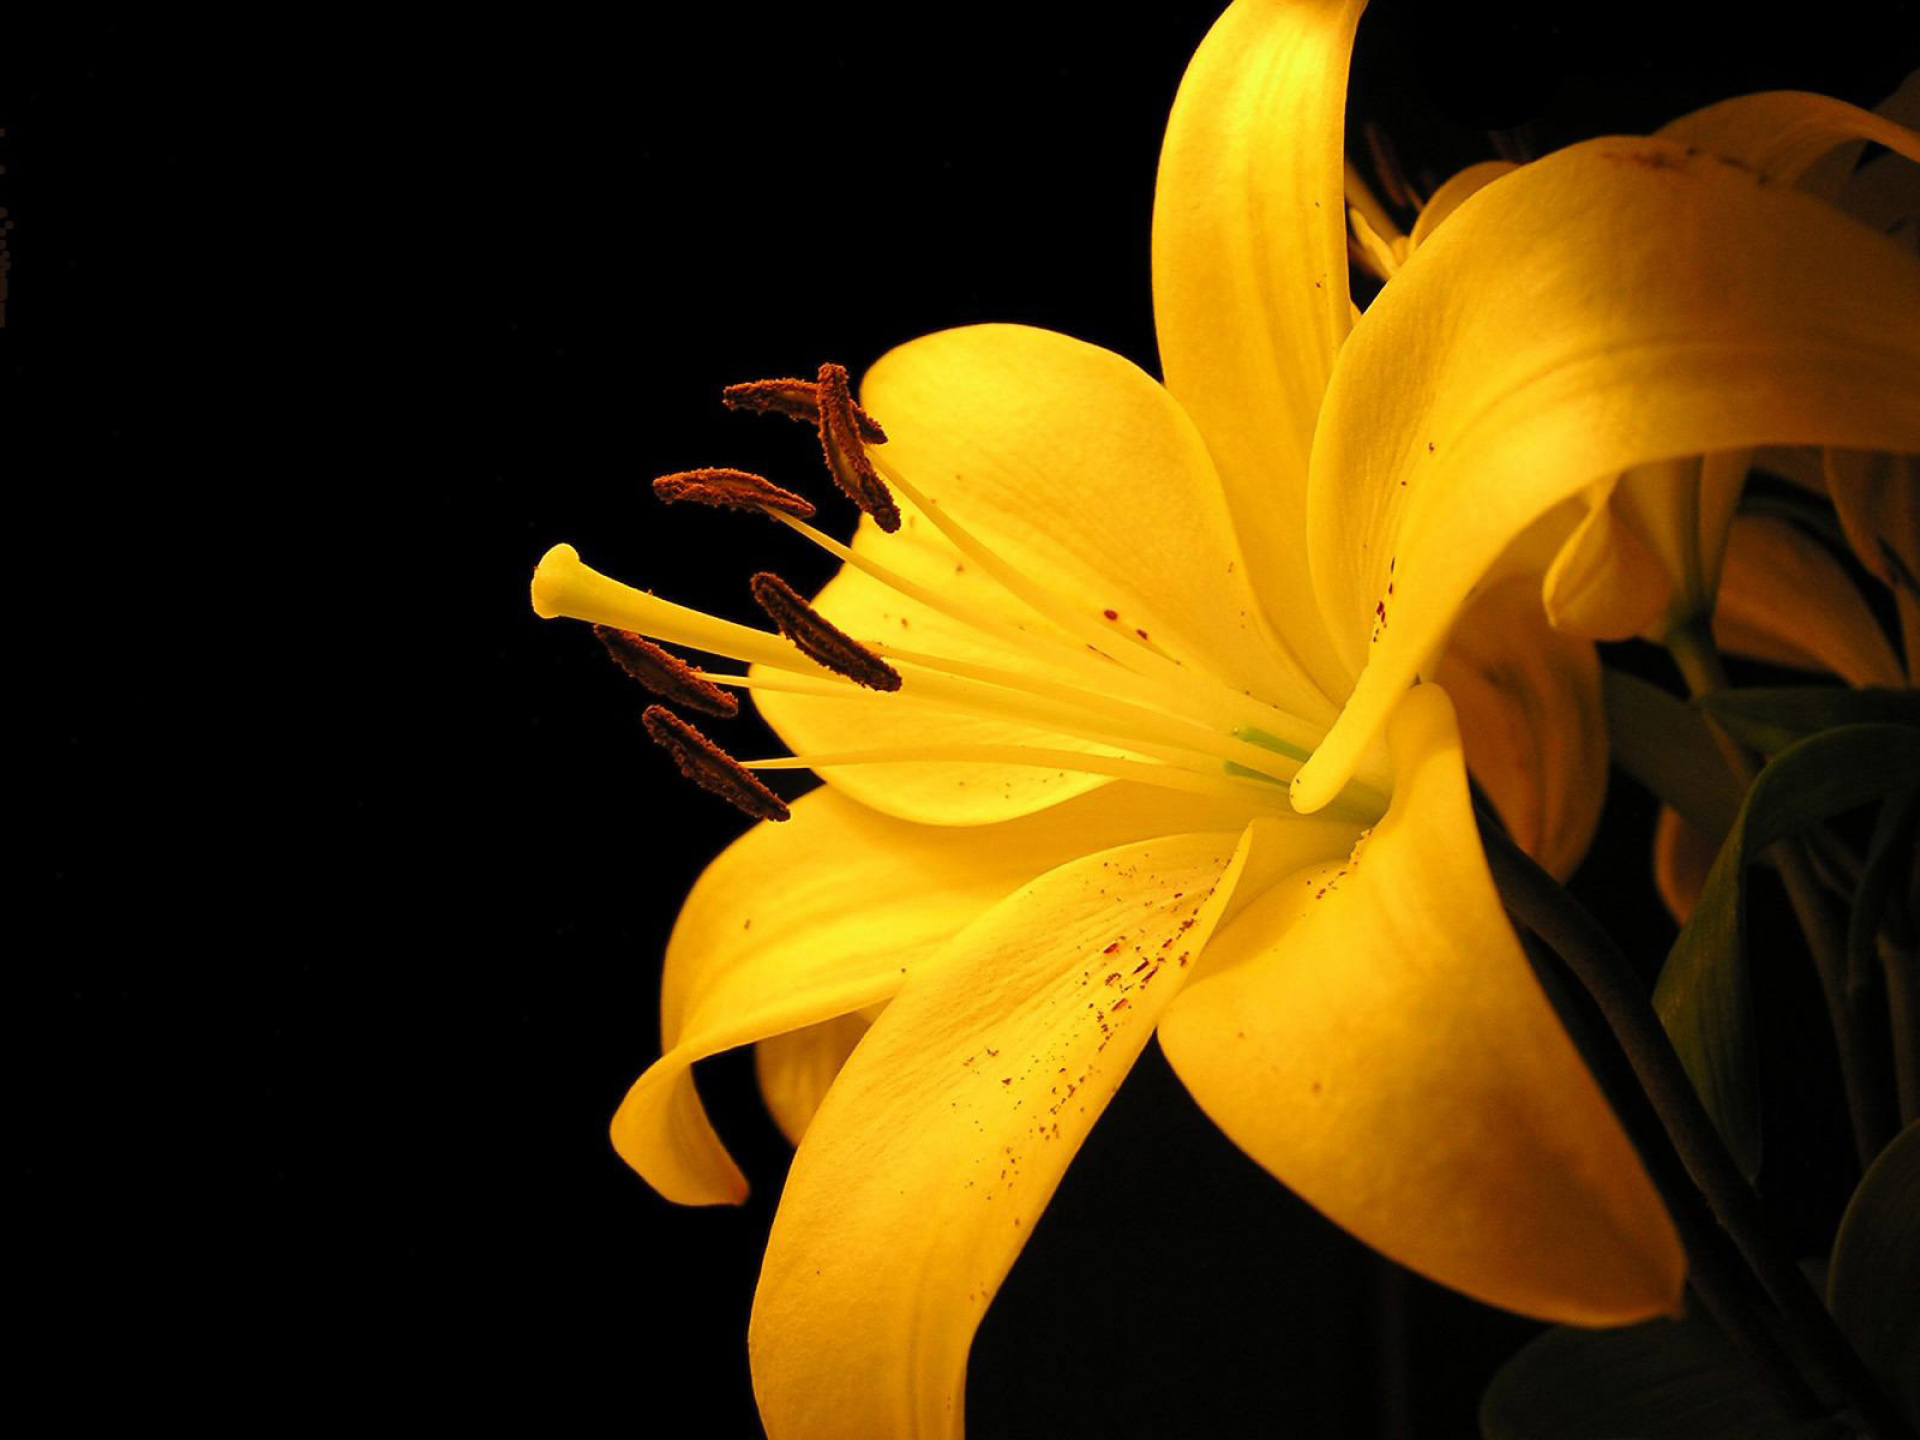 the bright yellow flowers are blooming in the dark